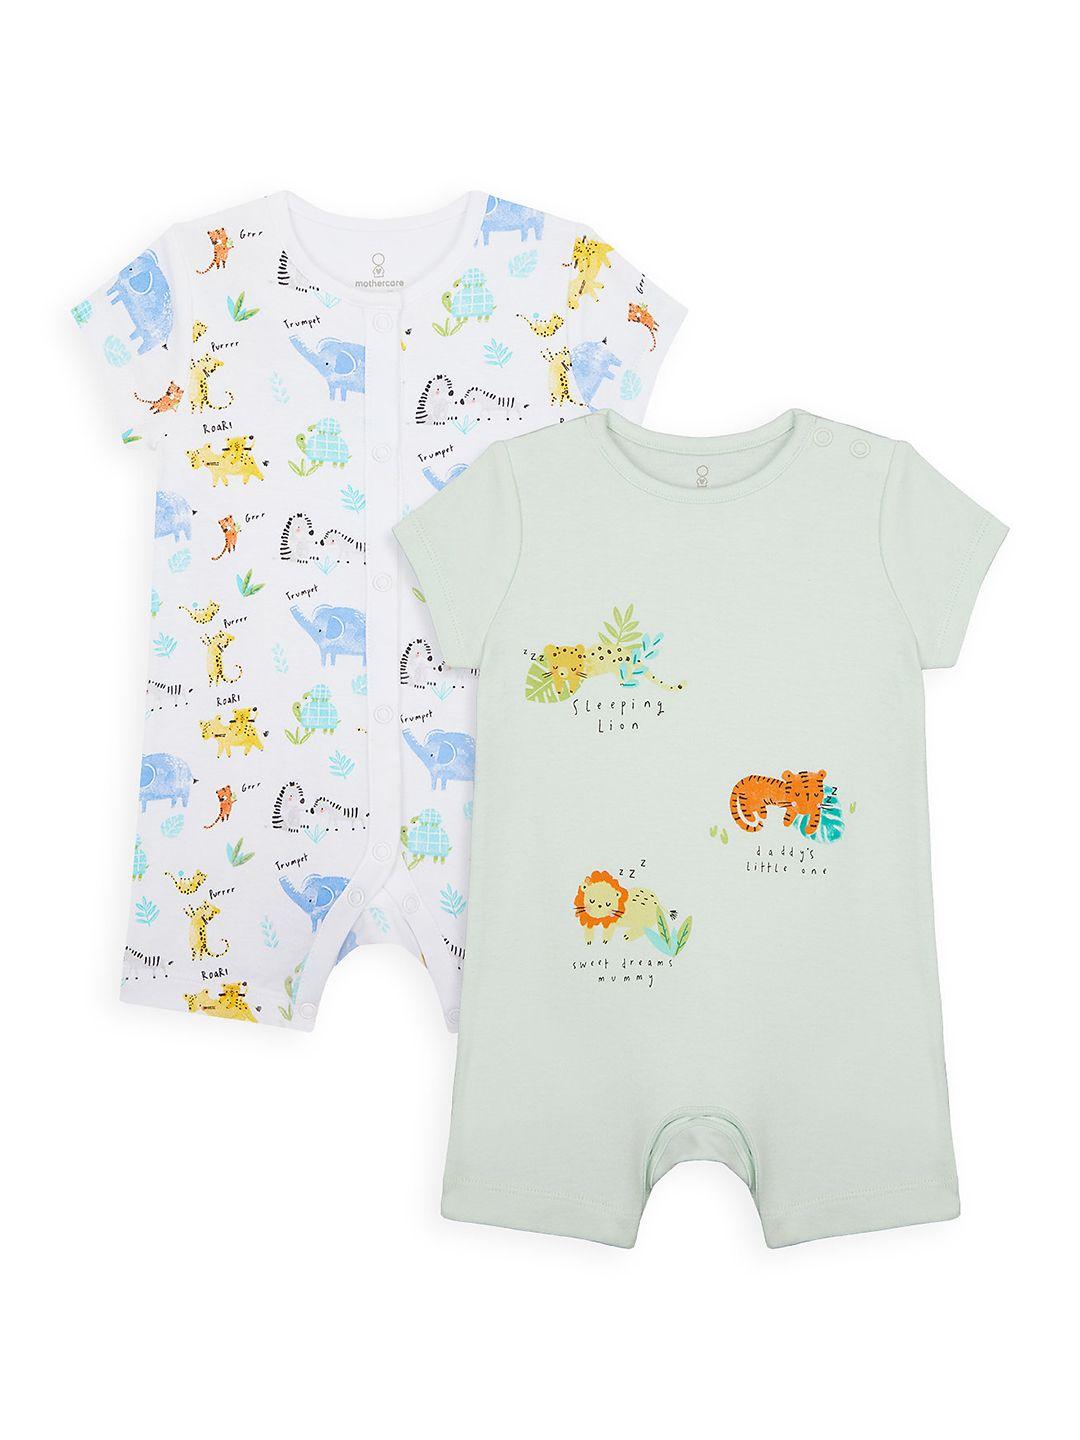 mothercare infant set of 2 white & green printed half sleeves pure cotton rompers